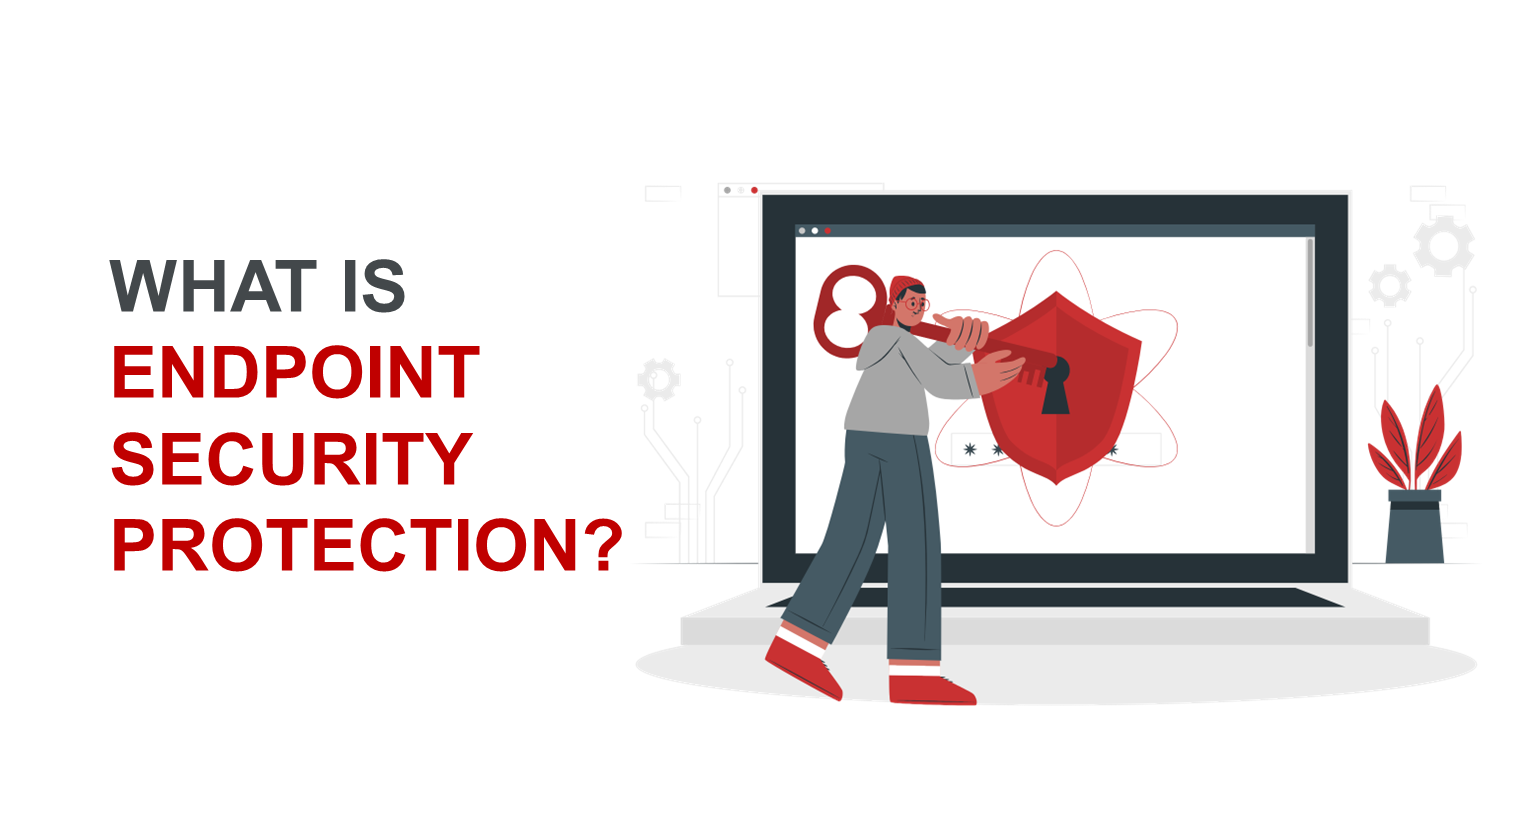 What is endpoint security protection?